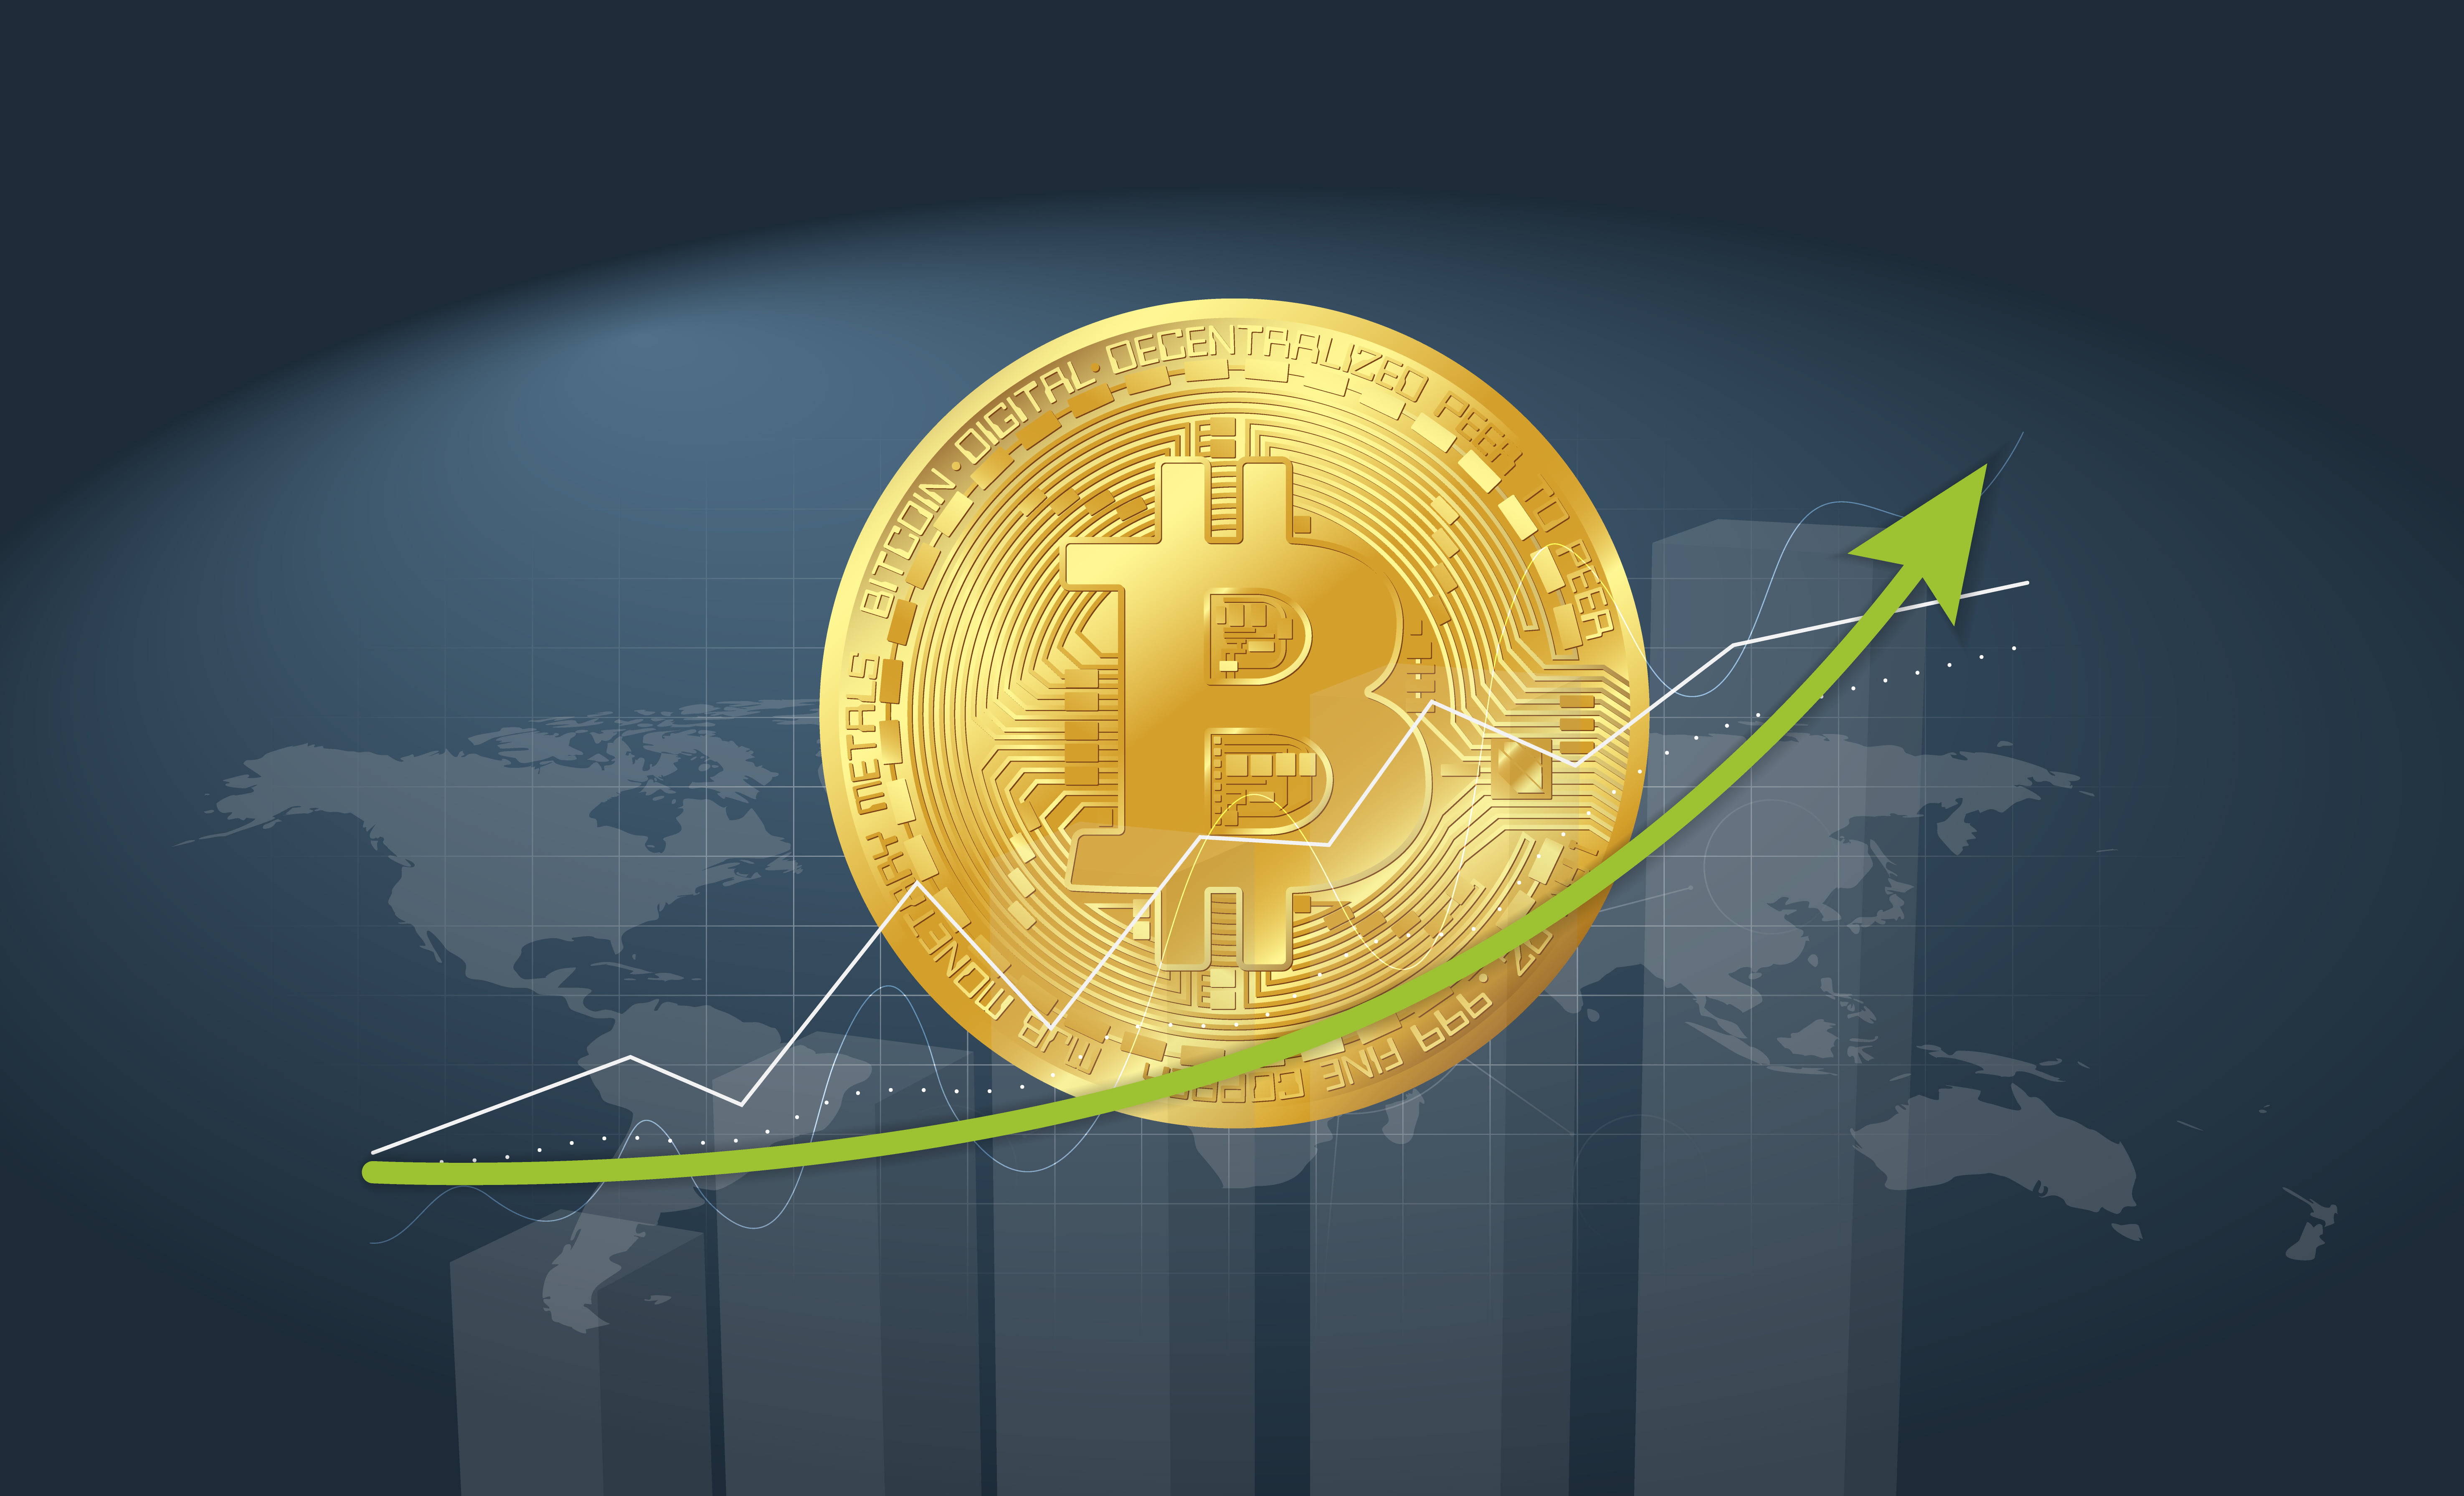 Logarithmic Growth Curve Charts Bitcoin Price At $170K in 2028